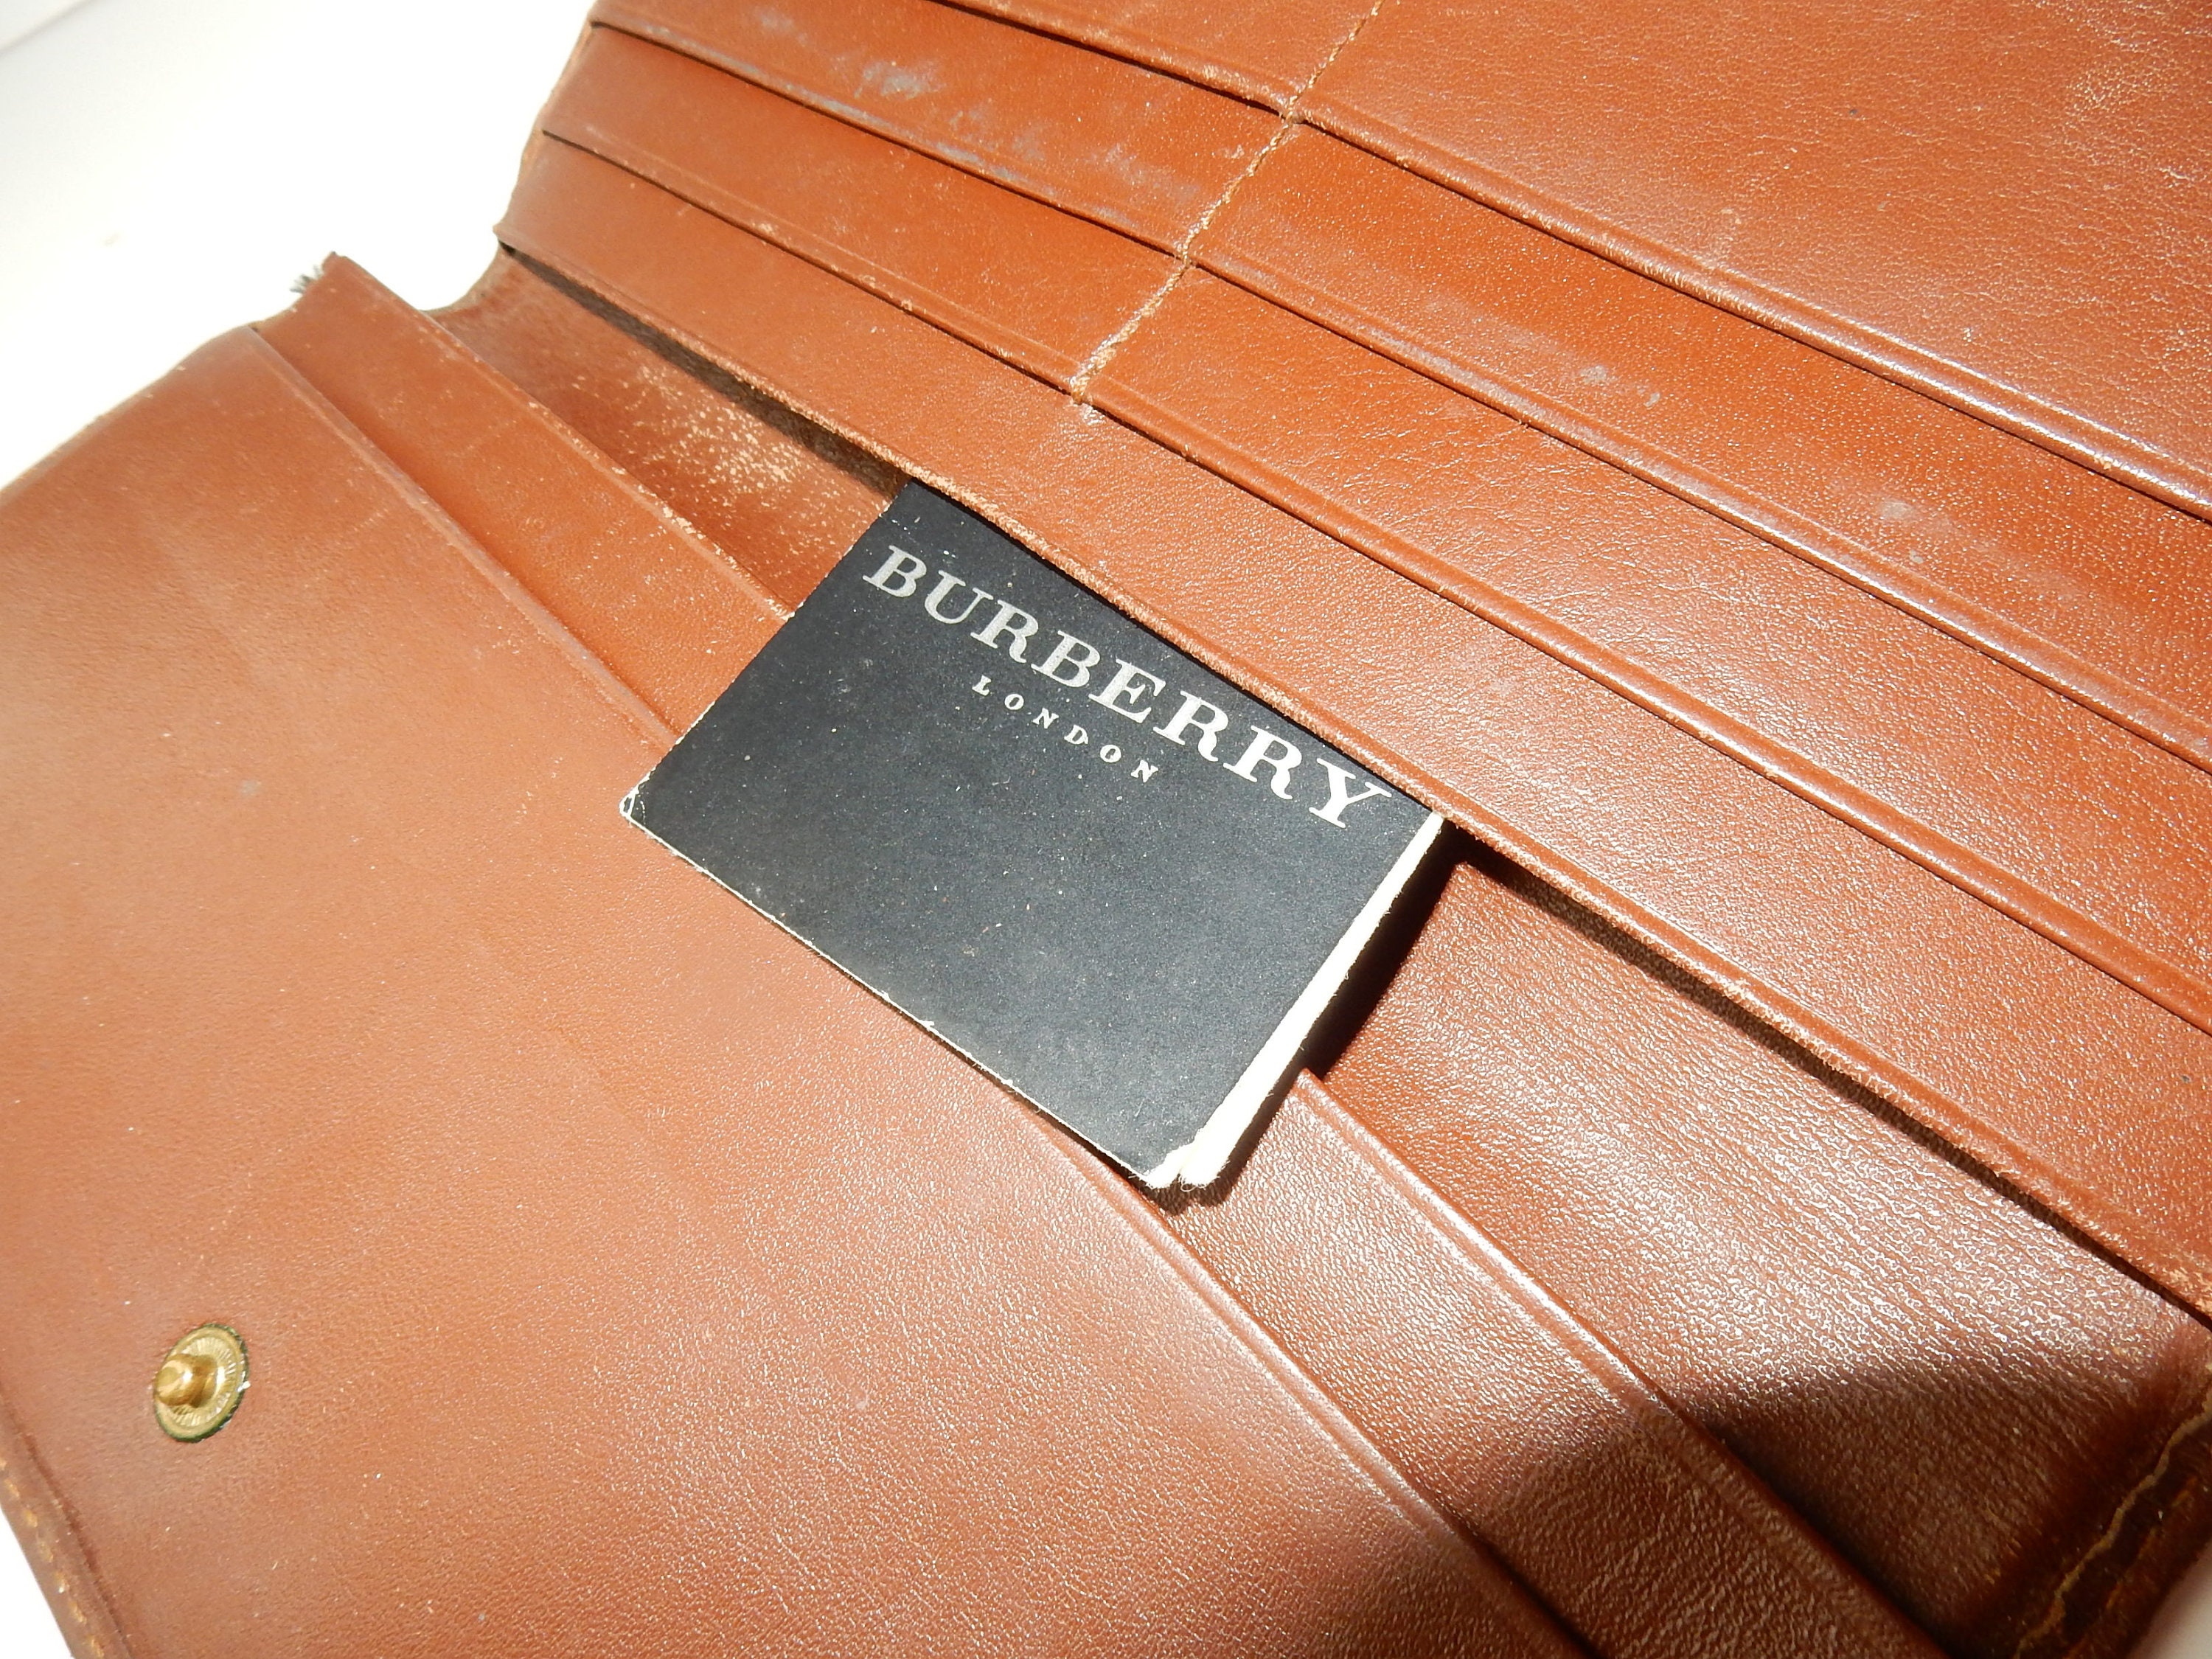 Burberry, Bags, Authentic Burberry Wallet